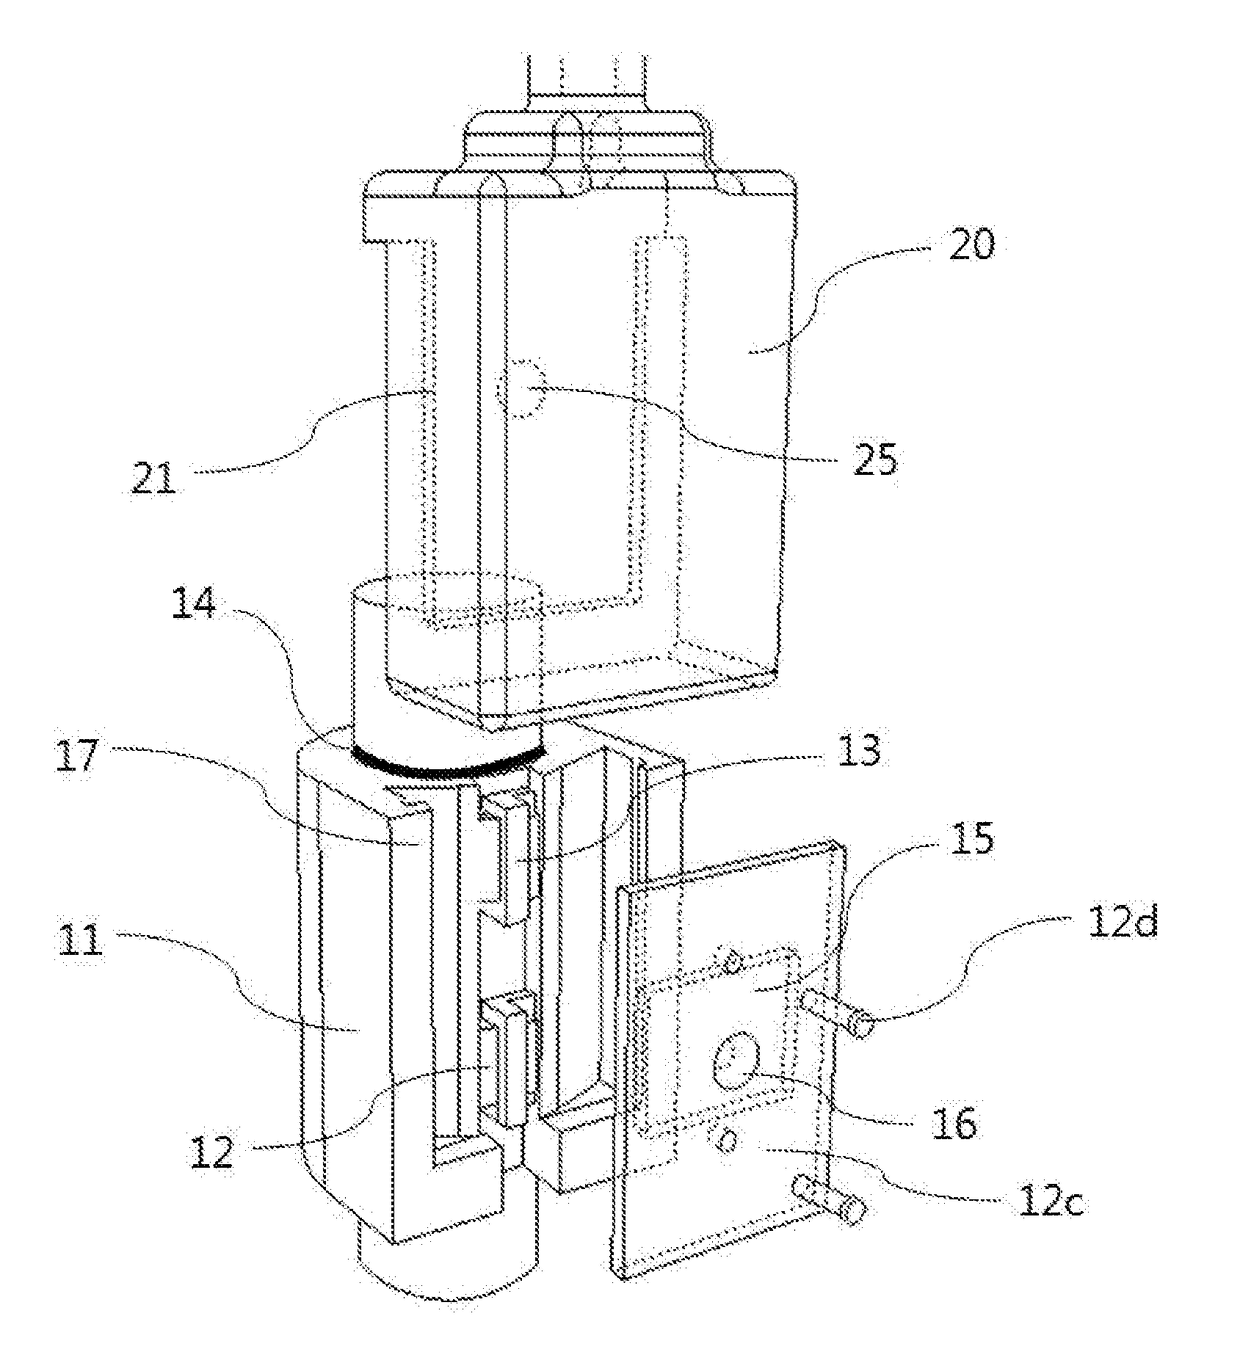 Mount having structure wherein coupling means is covered, and locking device for means of transportation using same